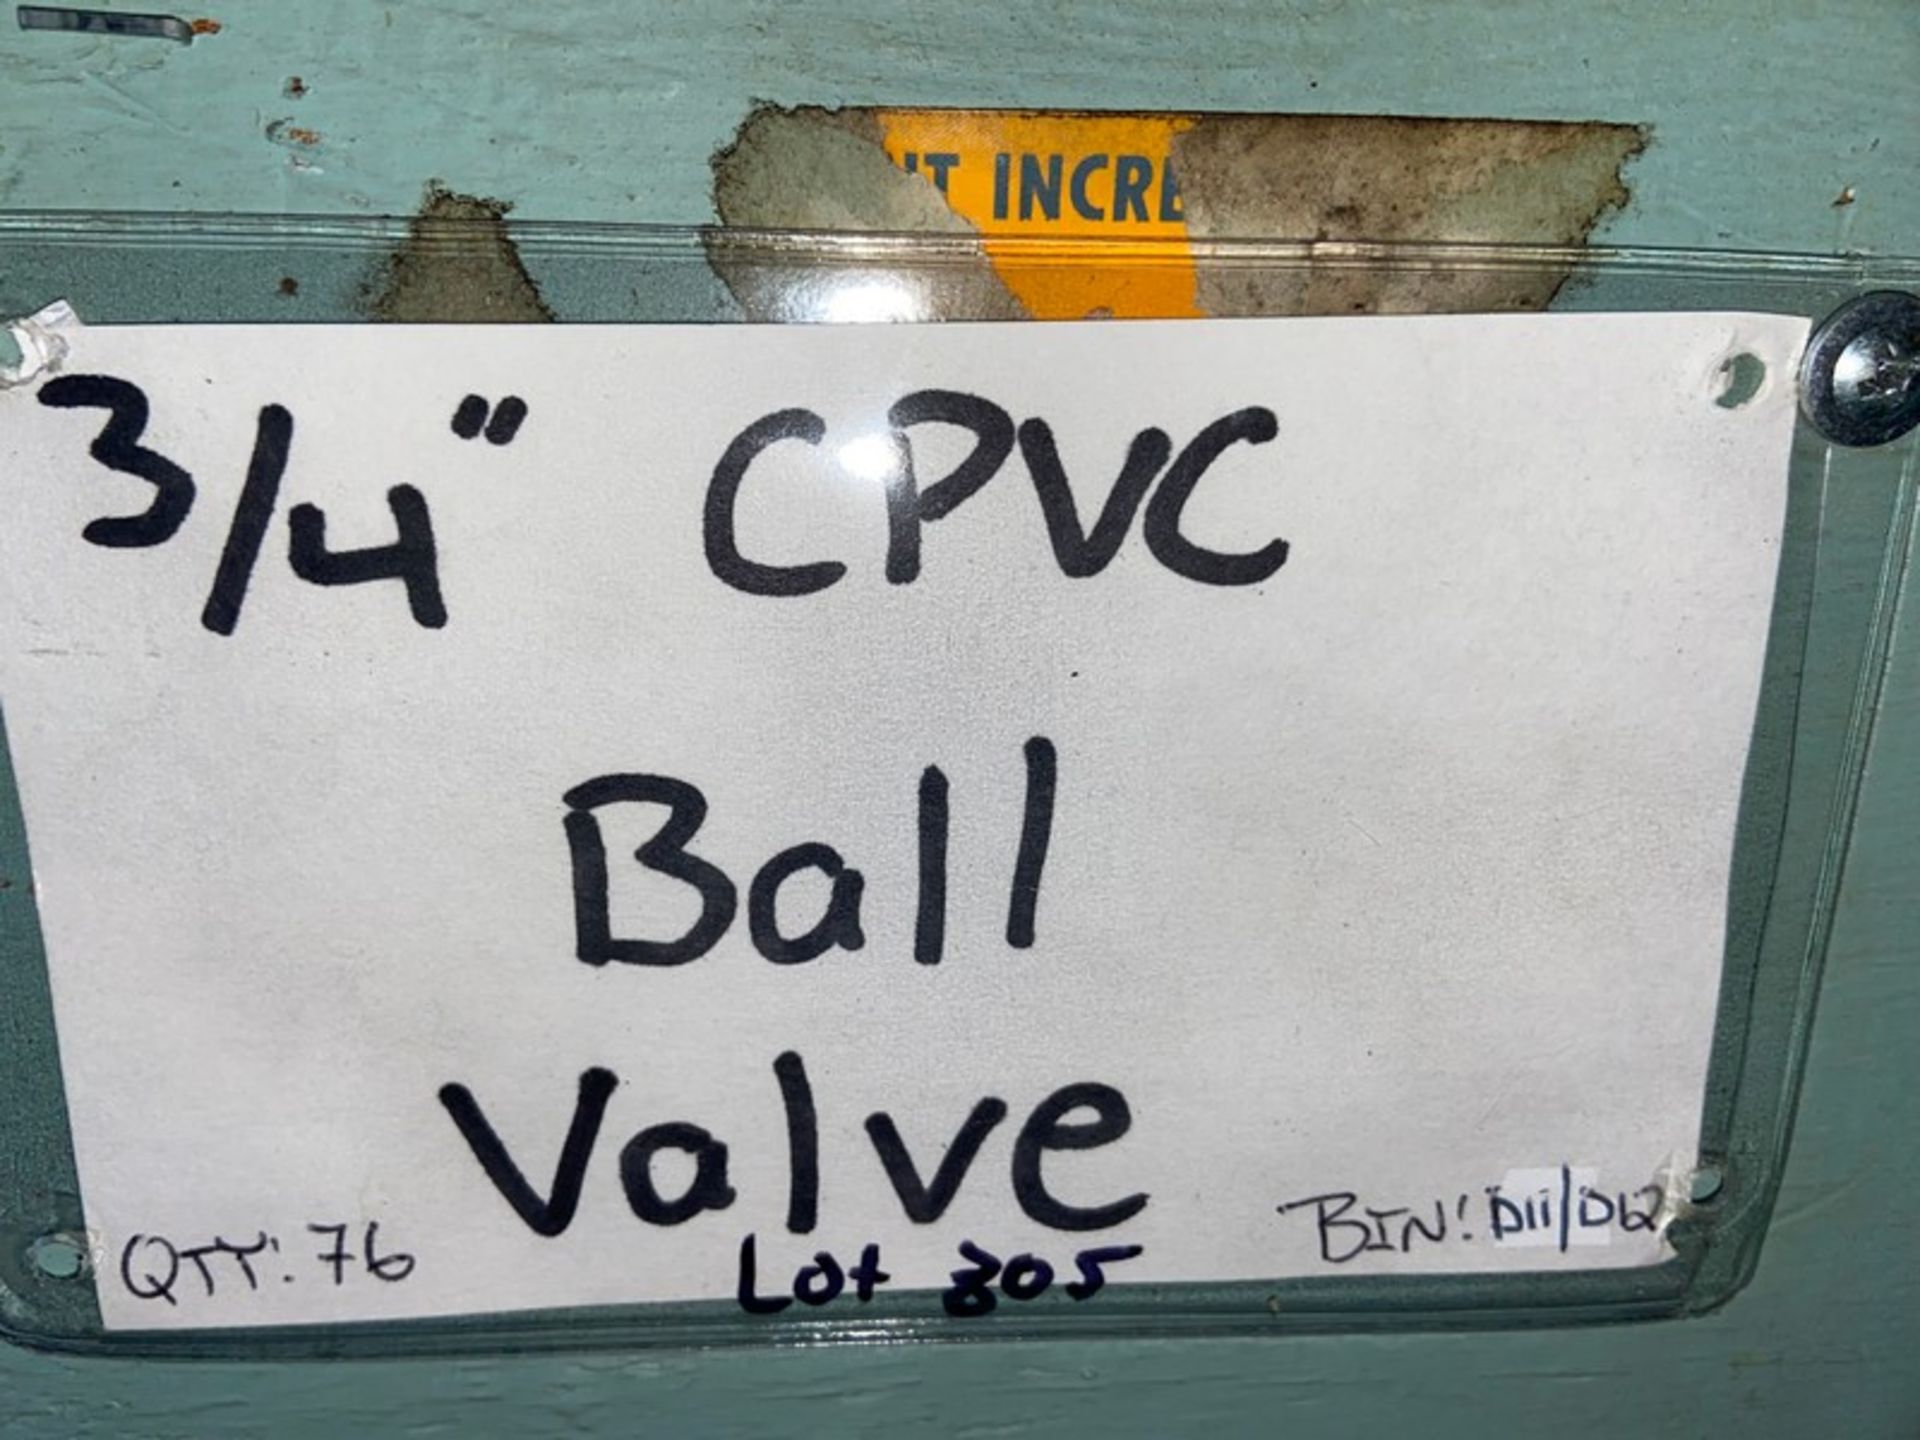 (76) 3/4” CPVC Ball valve (Bin:D11/D12) (LOCATED IN MONROEVILLE, PA) - Image 2 of 2